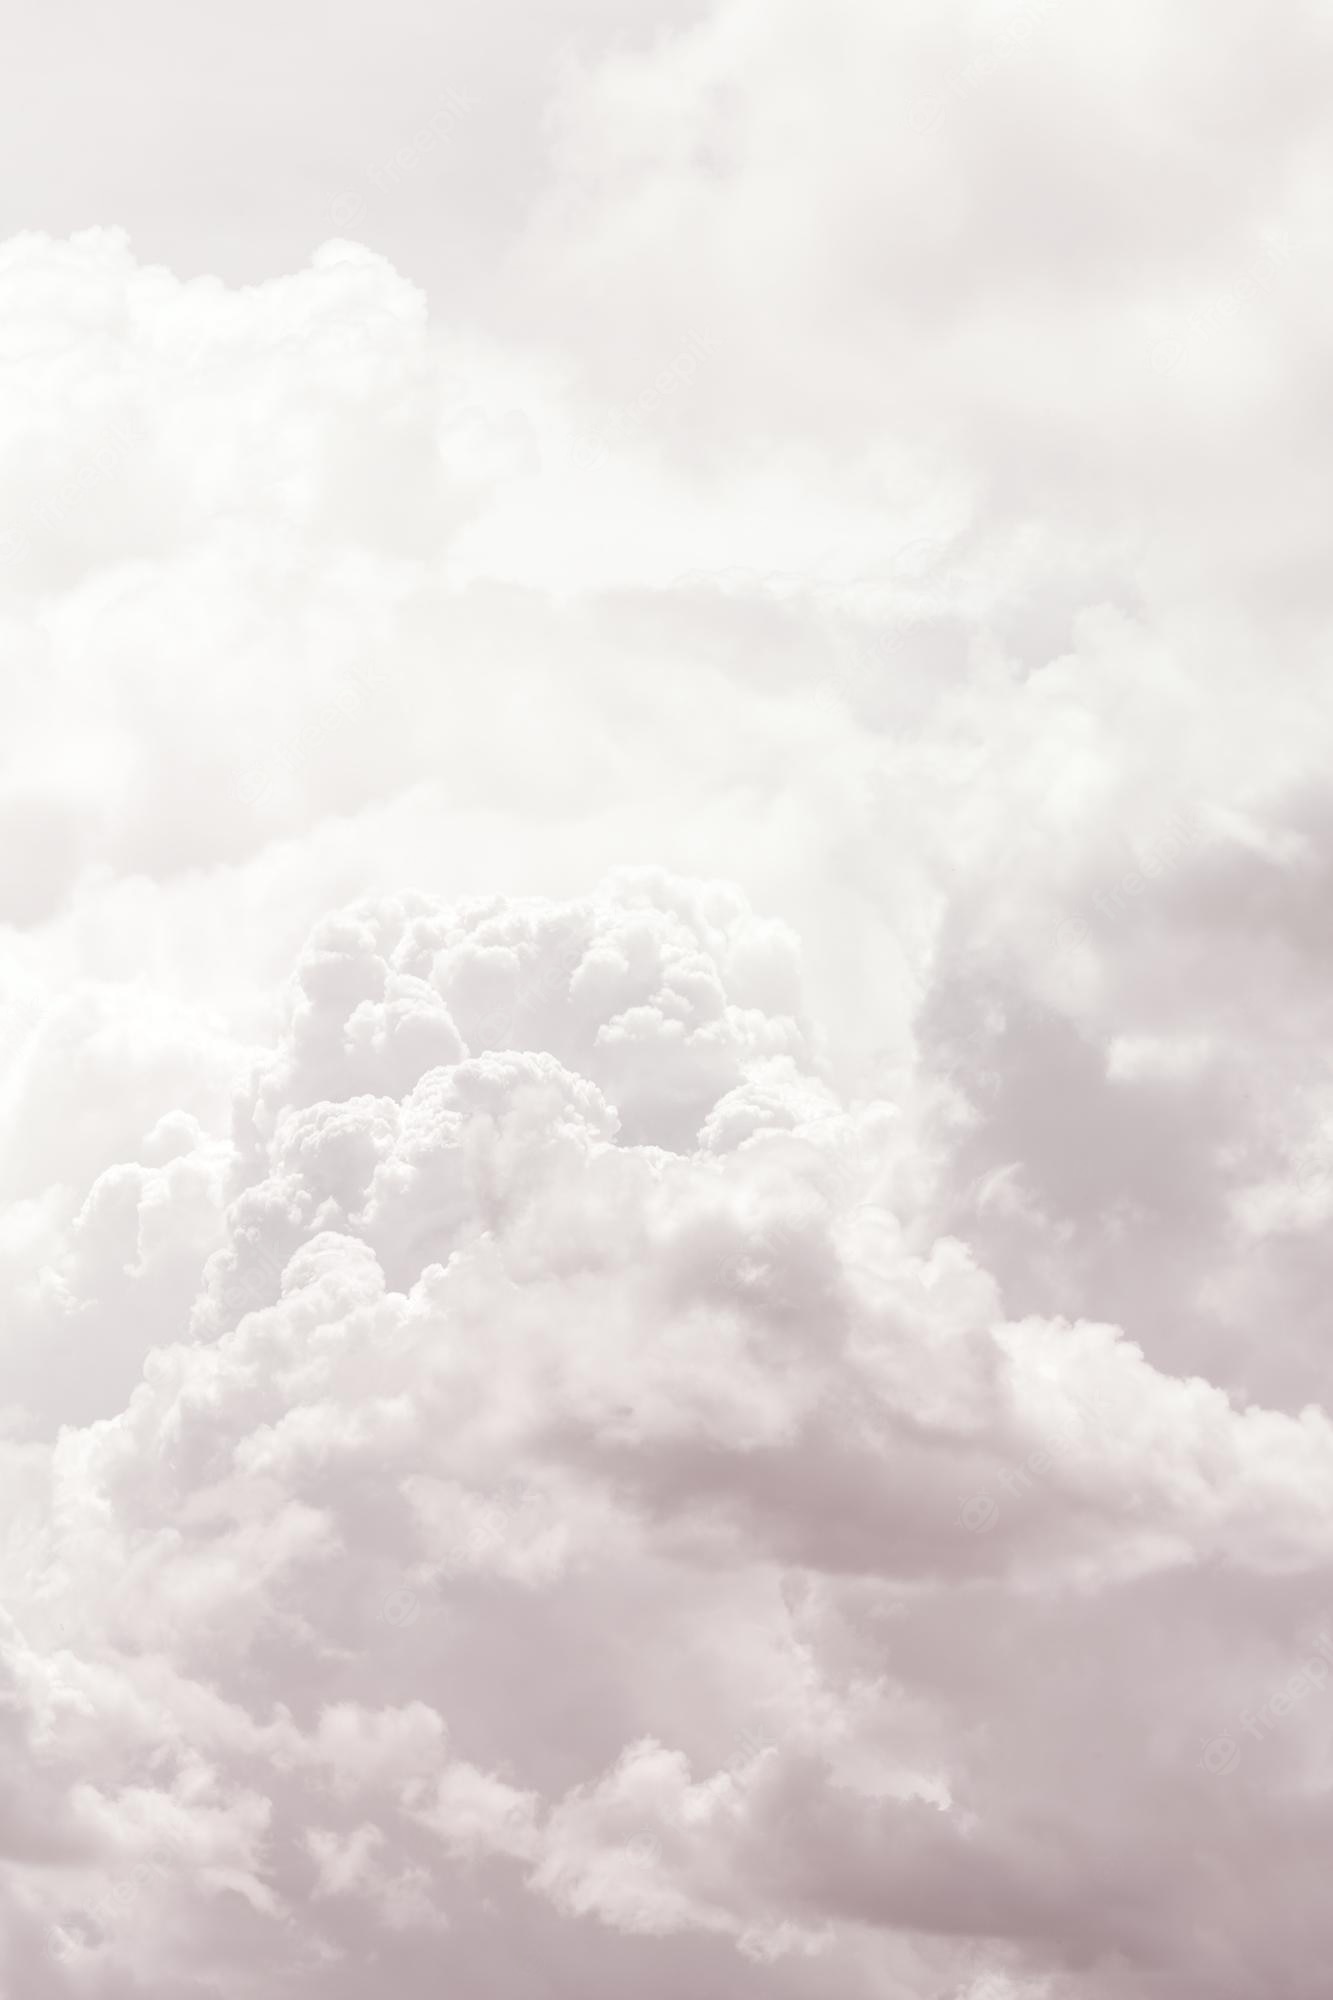 Page background aesthetic clouds images